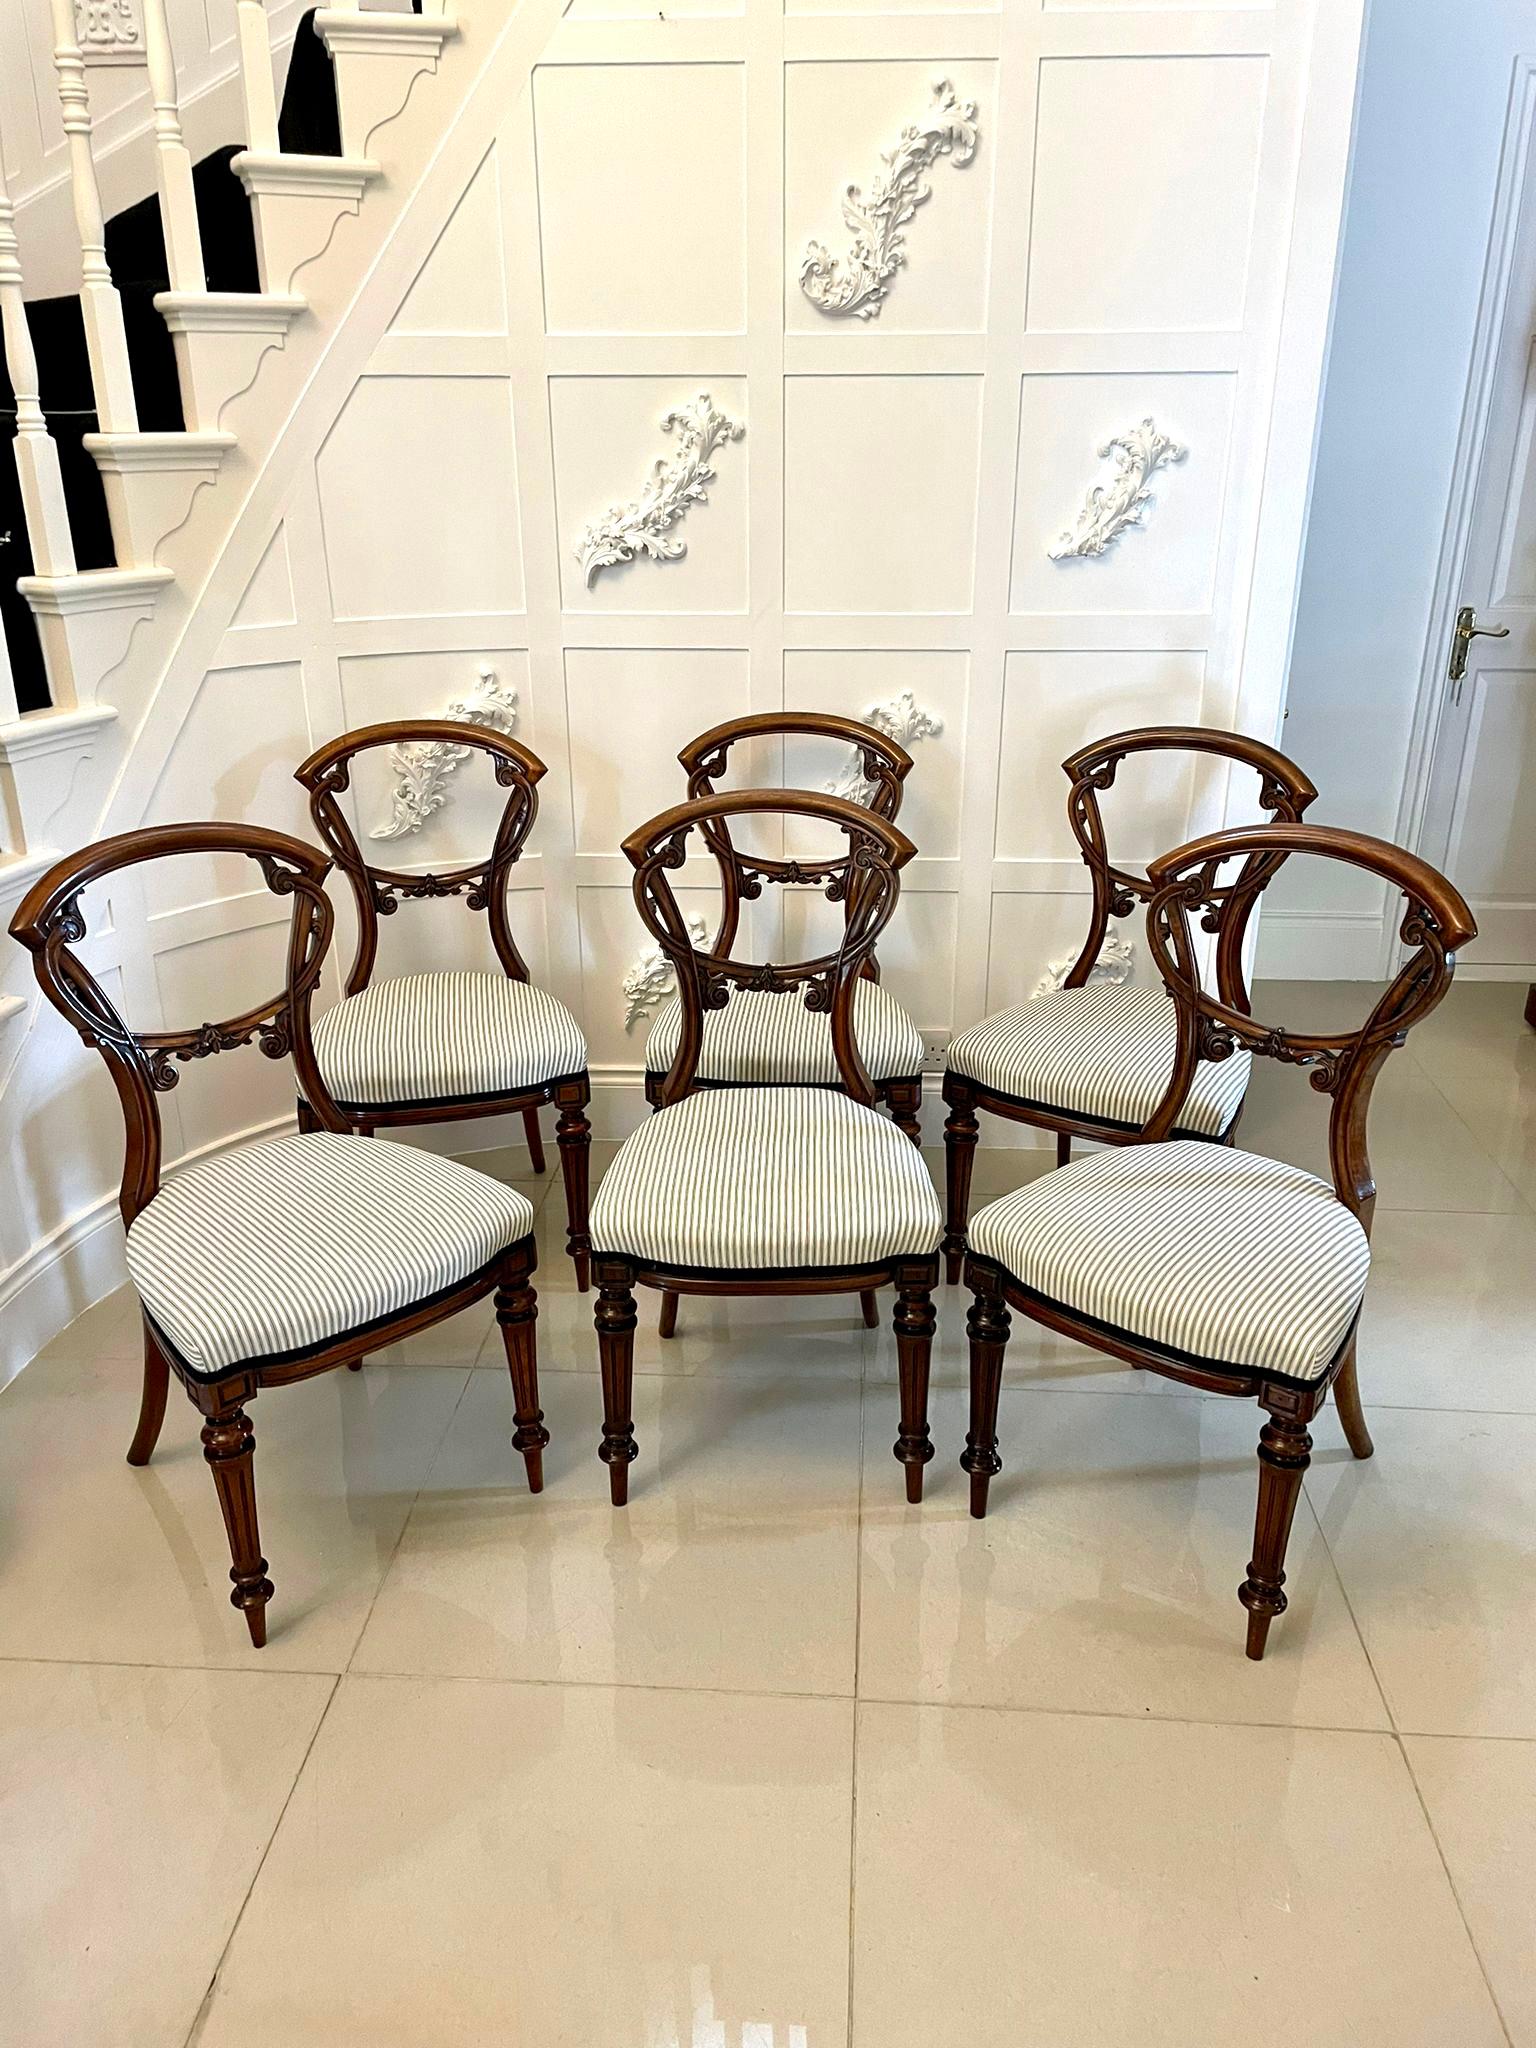 Fine quality set of 6 antique Victorian quality carved walnut dining chairs having Fine quality carved solid walnut shaped backs, newly reupholstered seats in a quality fabric and standing on turned reeded tapering legs to the front and out swept